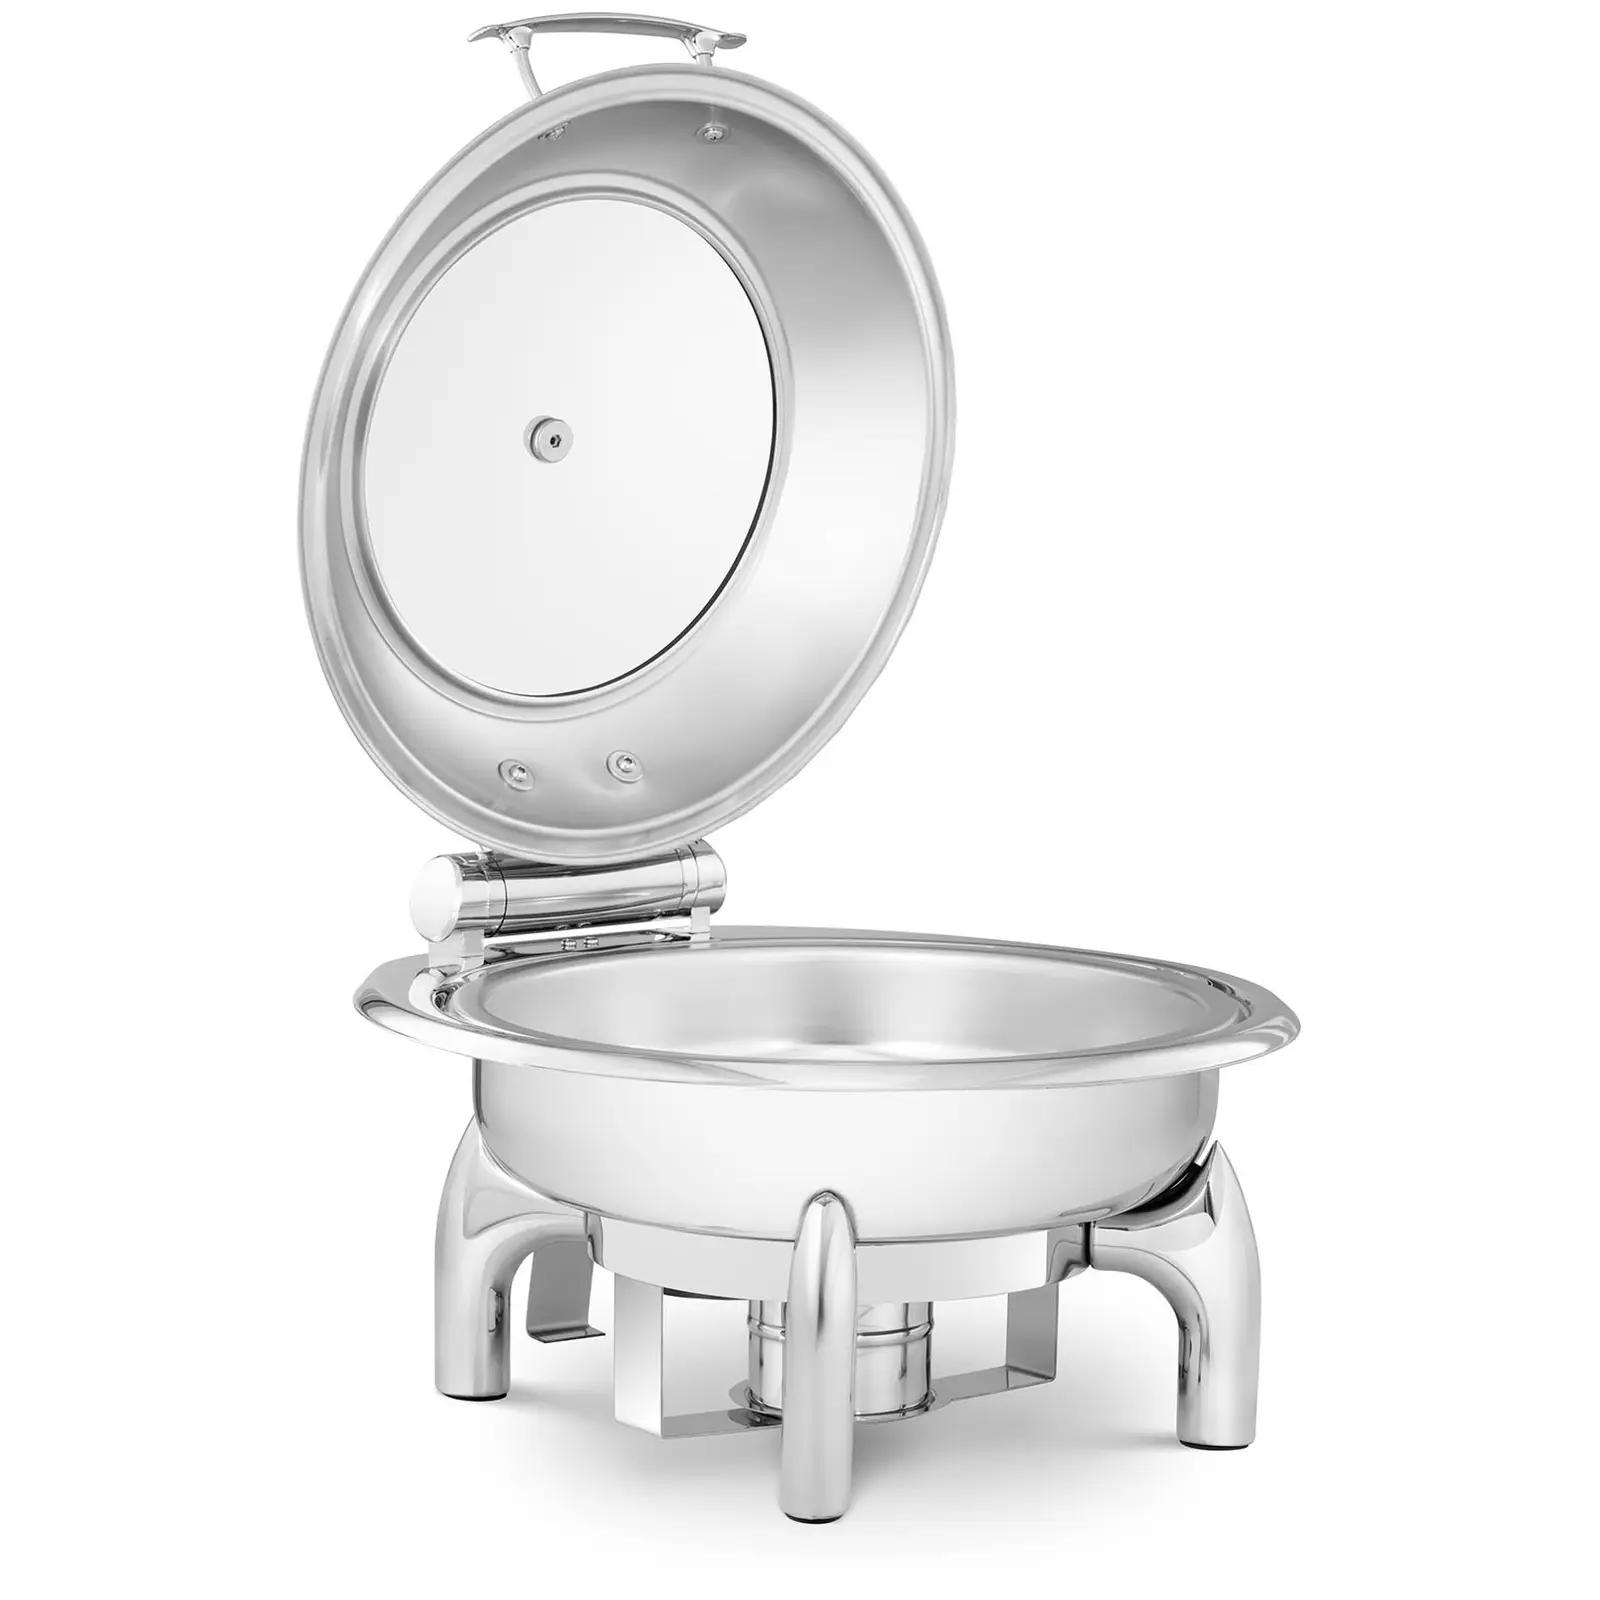 Chafing Dish - round with viewing window - Royal Catering - 5.5 L - 1 fuel cell